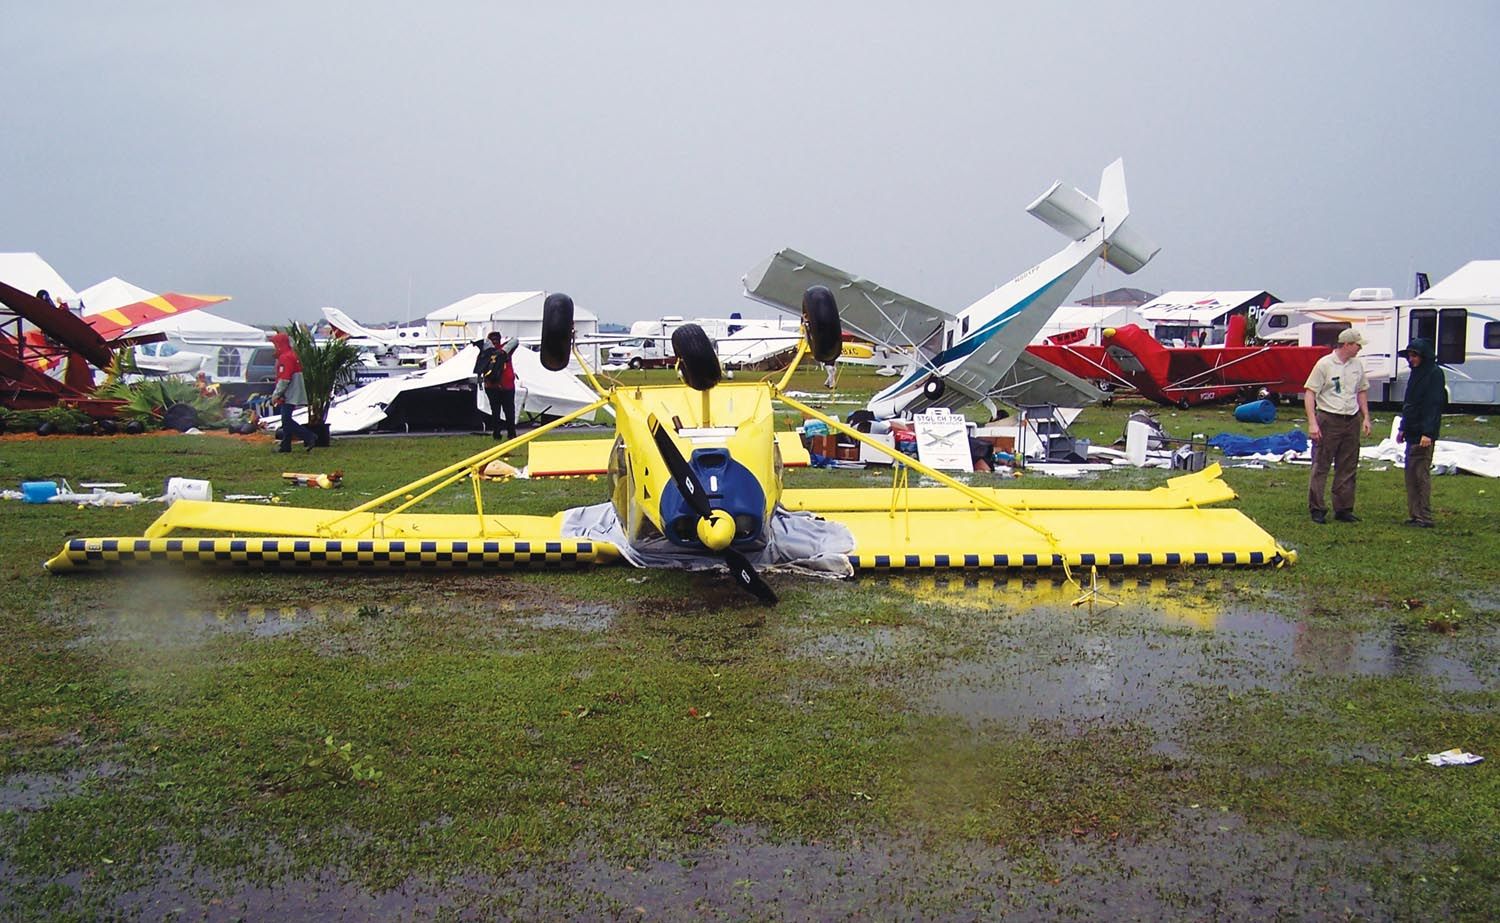 Dozens of airplanes, mostly experimentals, were seriously damaged when a tornado carved through the Sun ’n Fun homebuilt parking area in 2011. Thankfully, no one was seriously hurt.